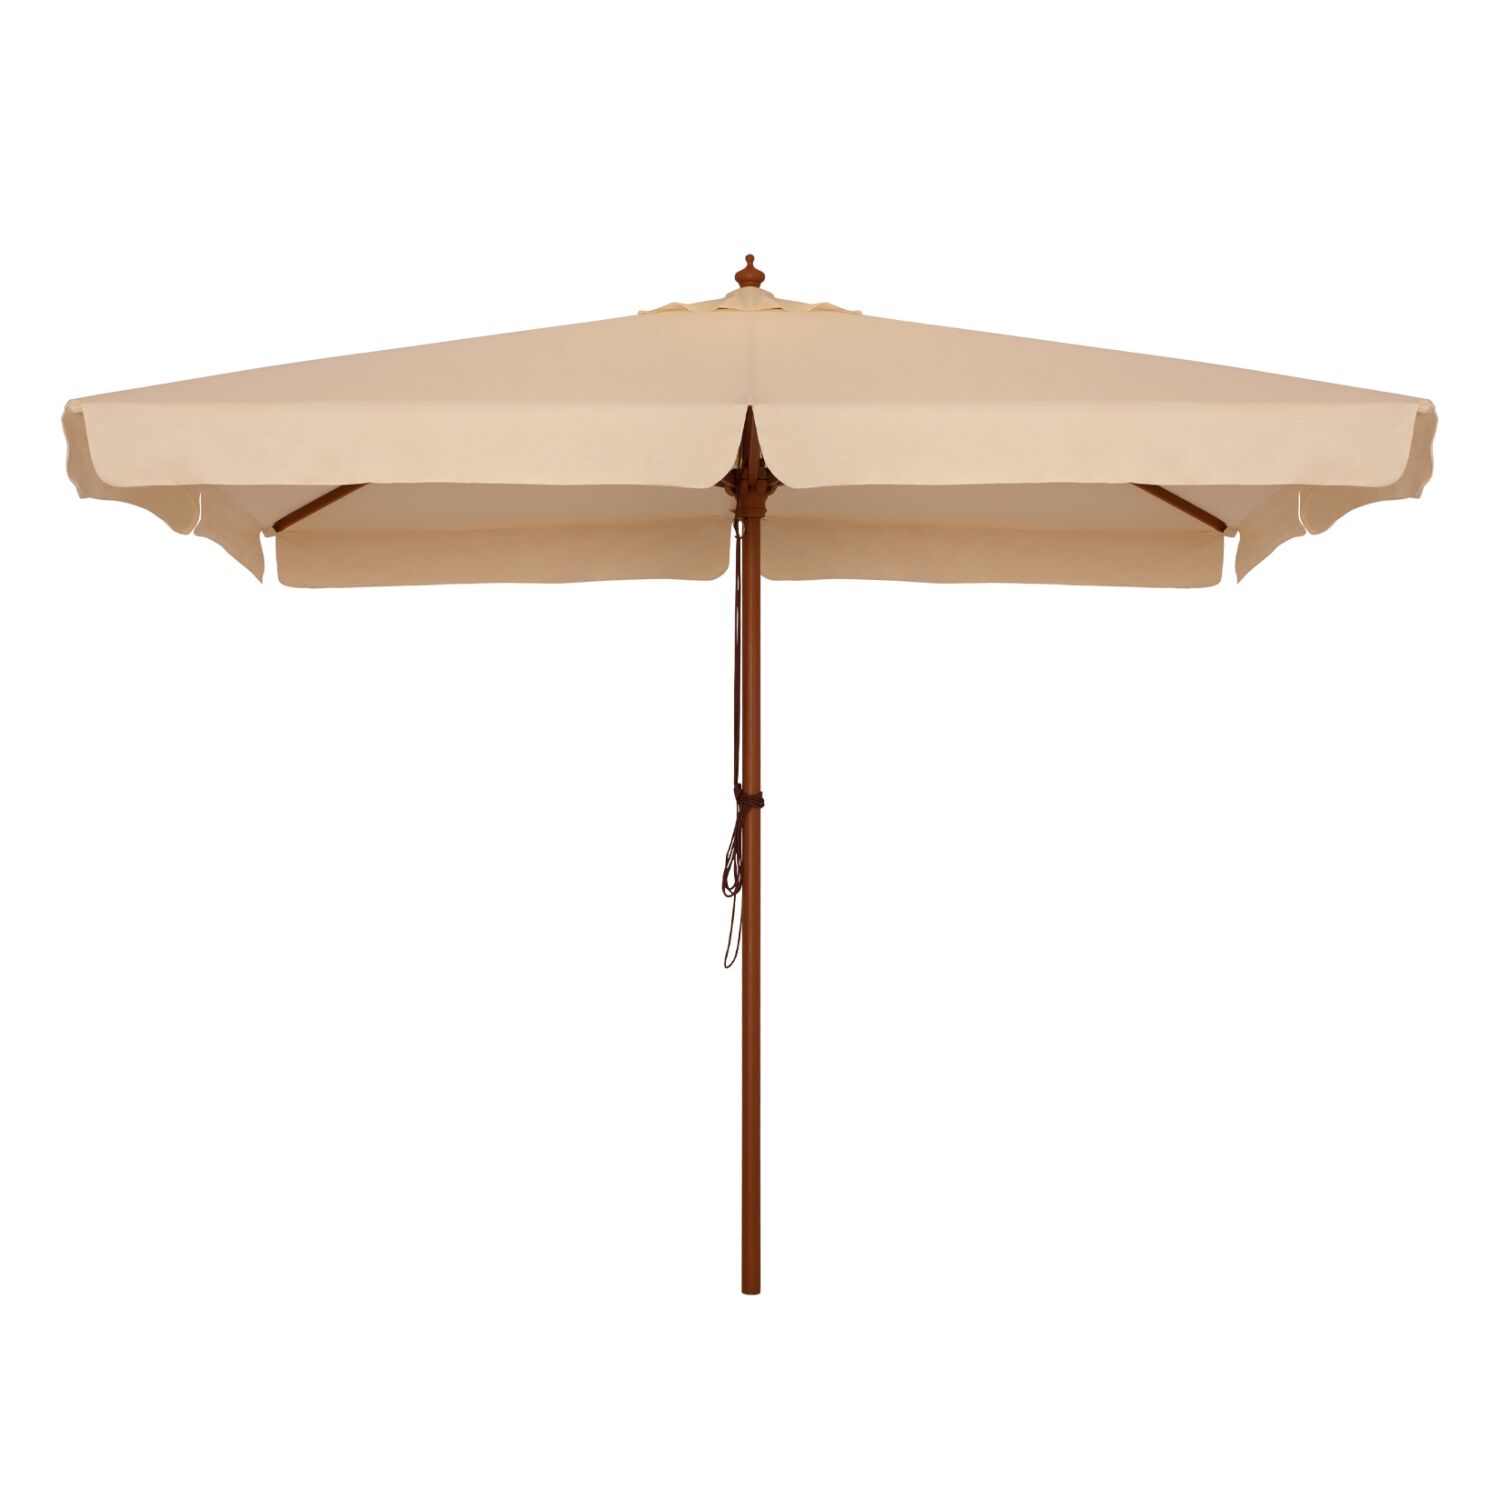 Professional umbrella 3x3m with wooden frame HM6022 Beige